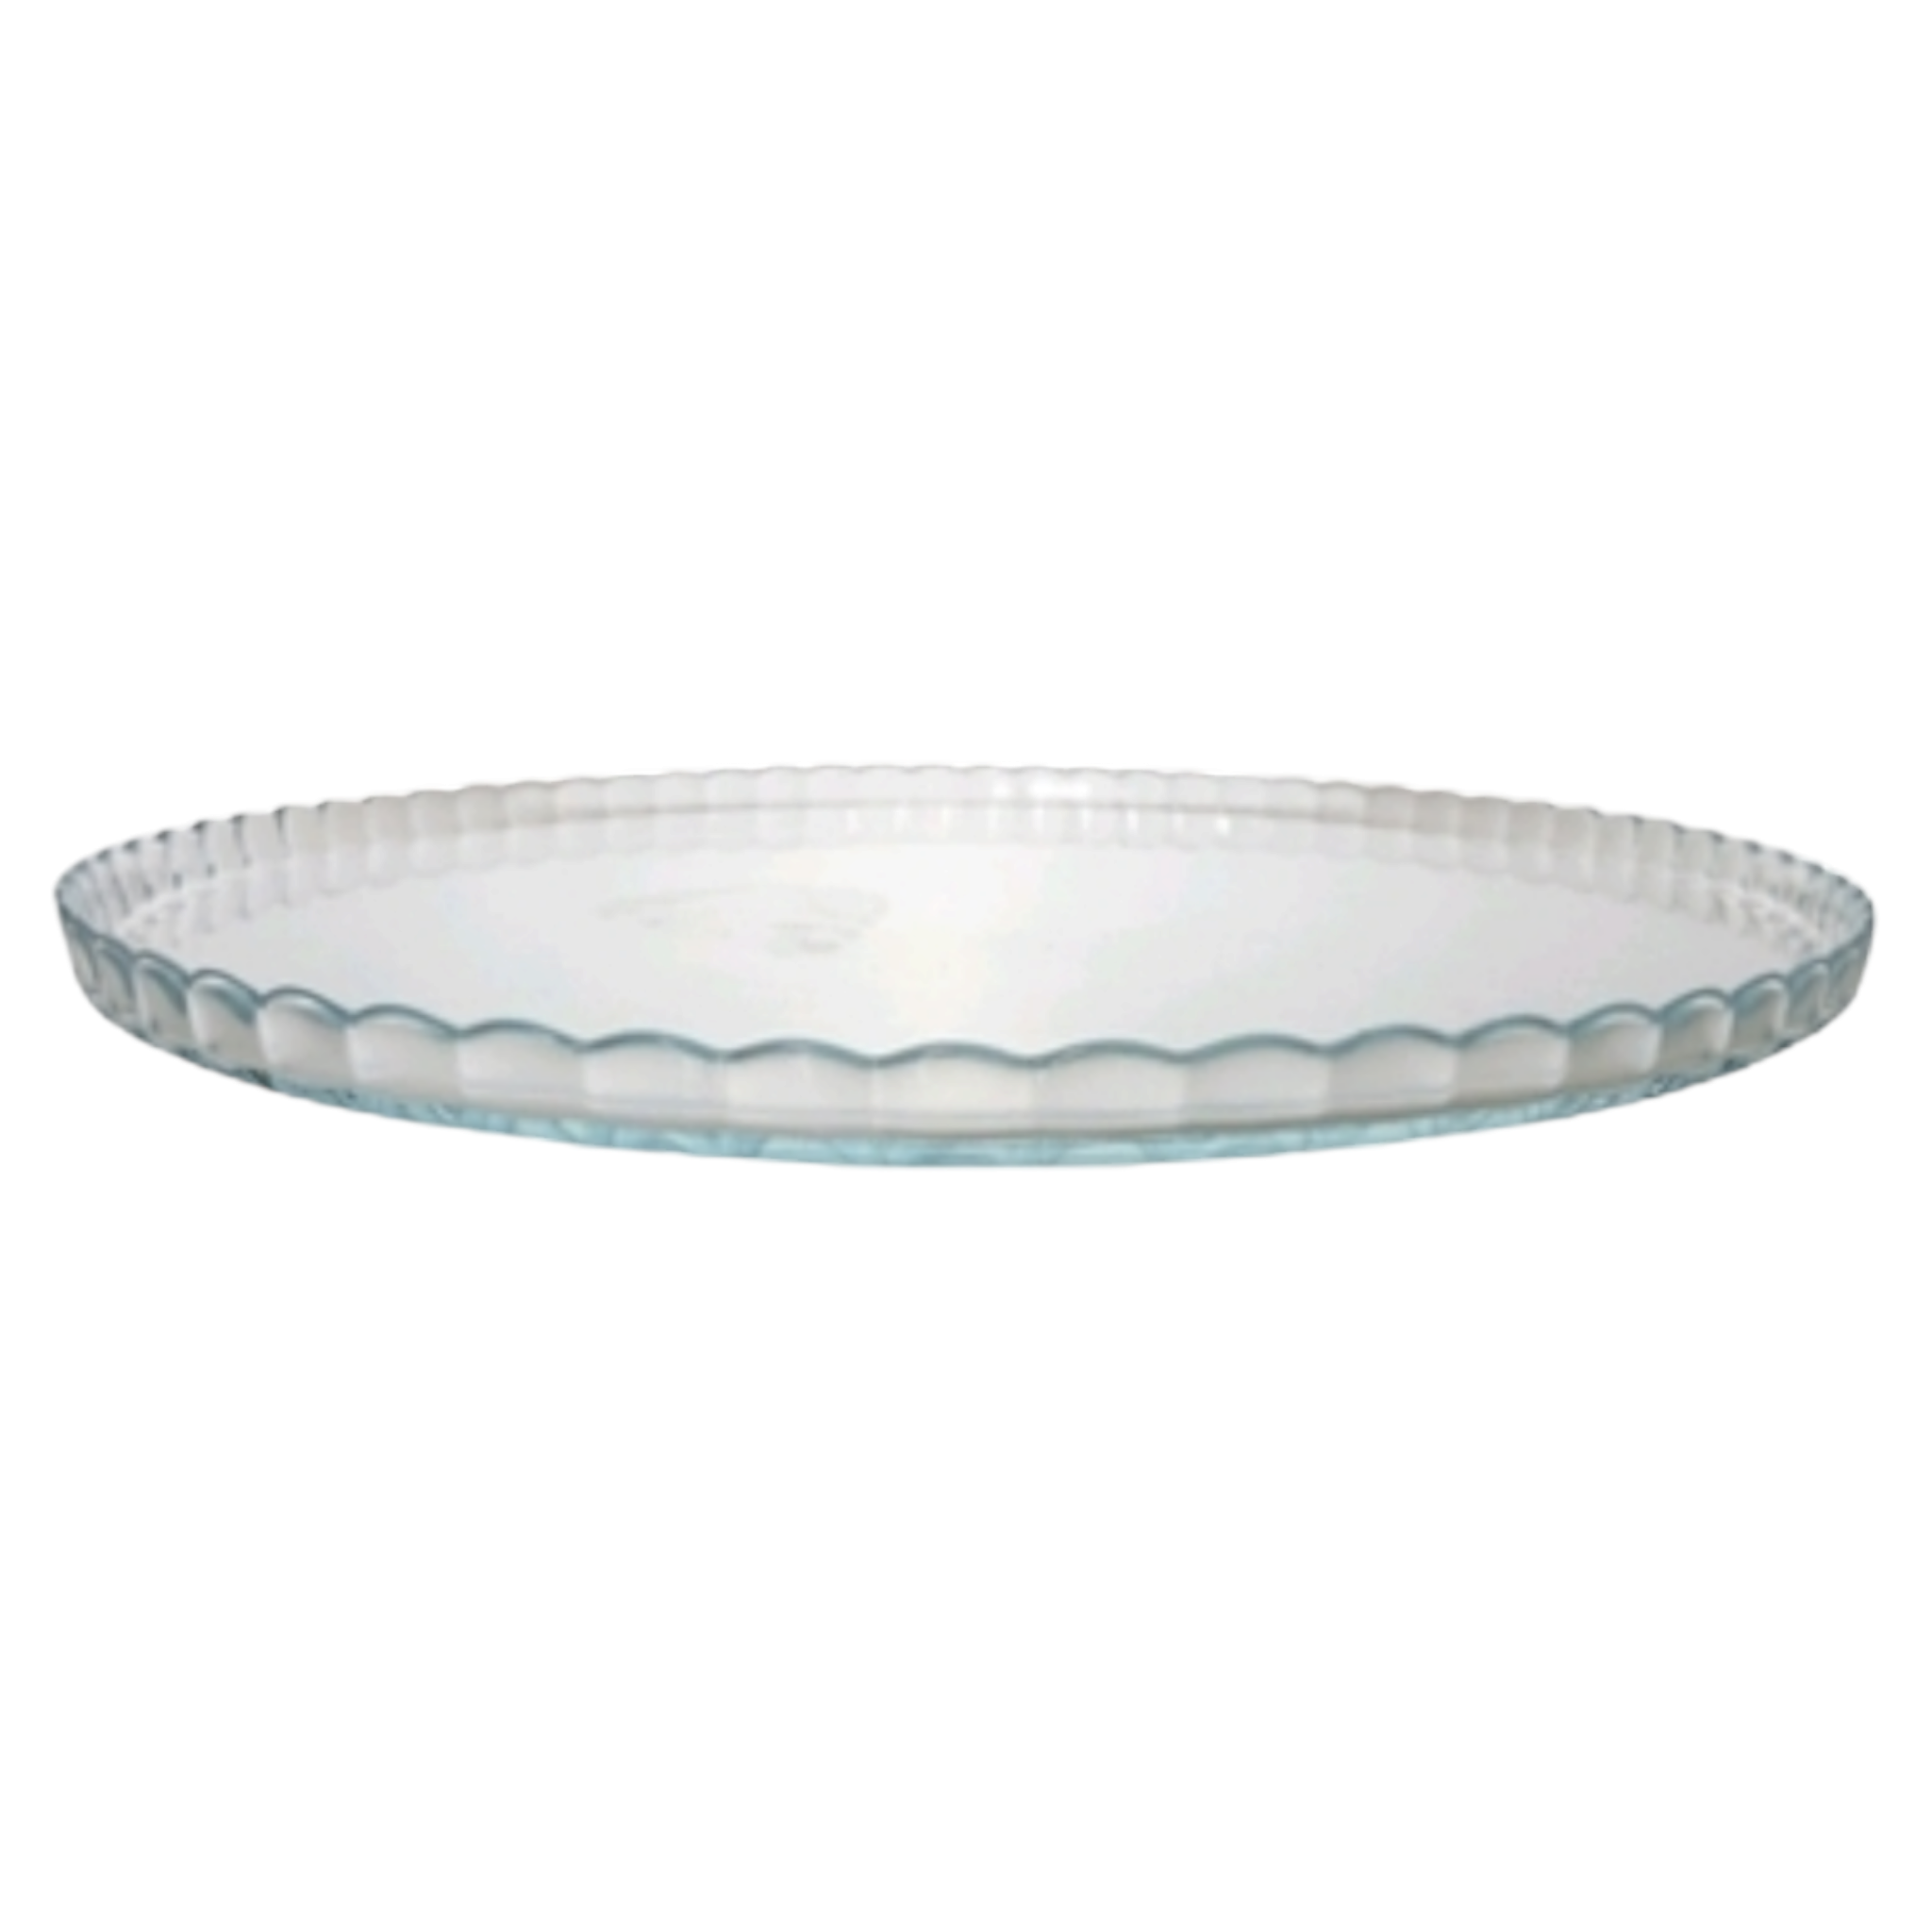 Pasabahce Patisserie Cake Platter 322mm Serving Tray 23094